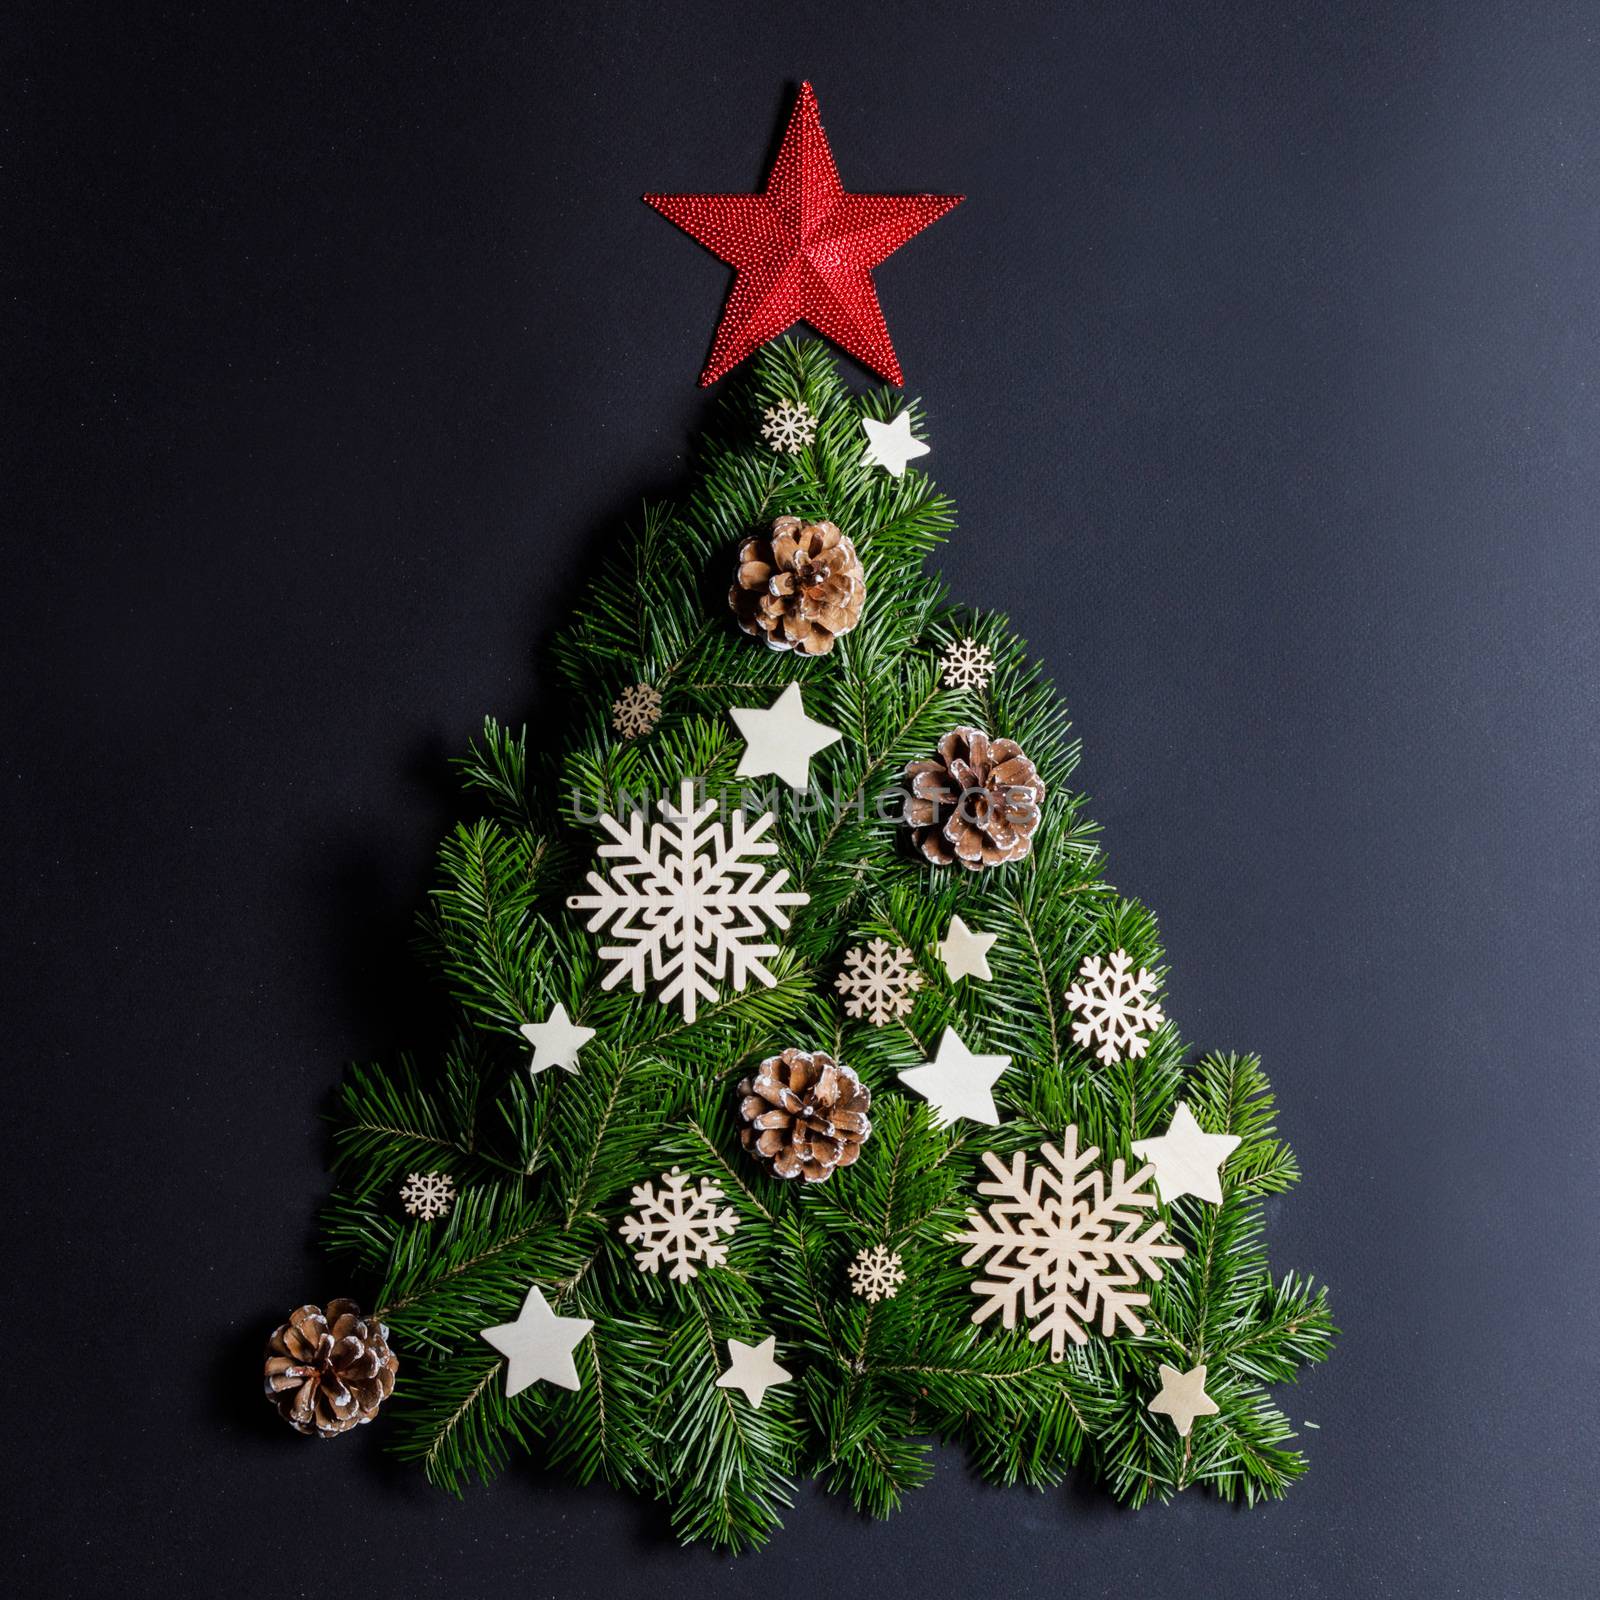 Christmas tree made of natural spruce branches deecor with red star on black background, flat lay card with copy space